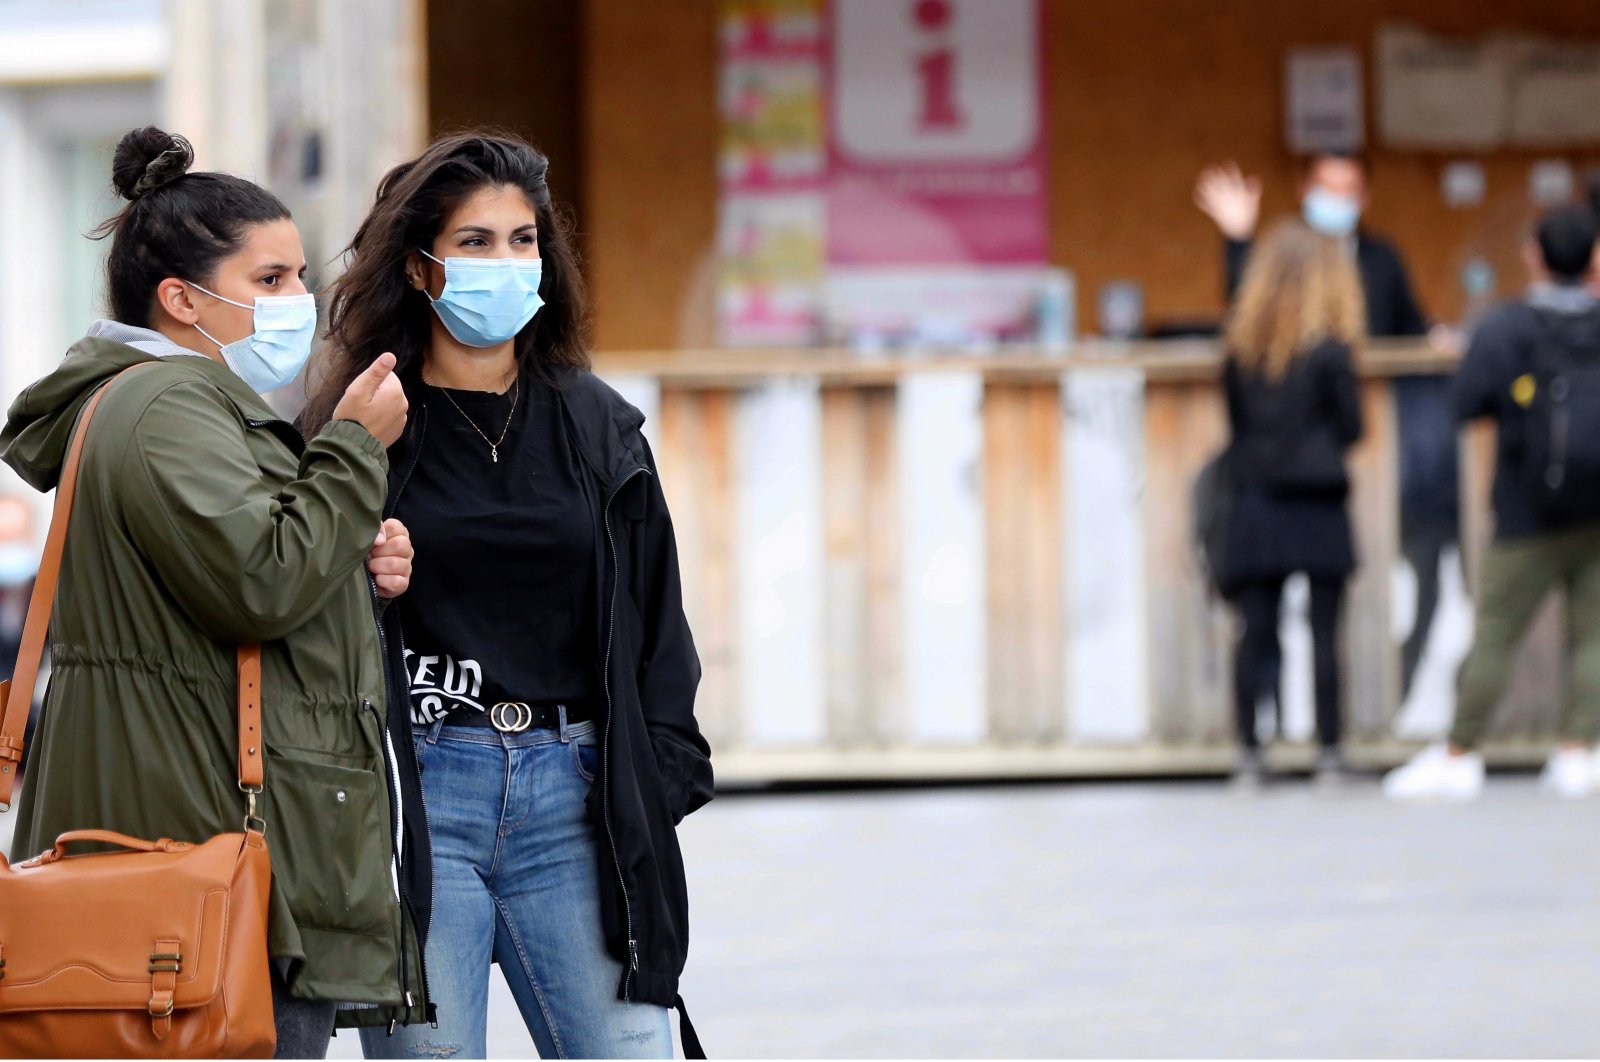 People wear protective face masks as a precaution against the coronavirus in Belgium's capital Brussels, July 28, 2020. (AA Photo)